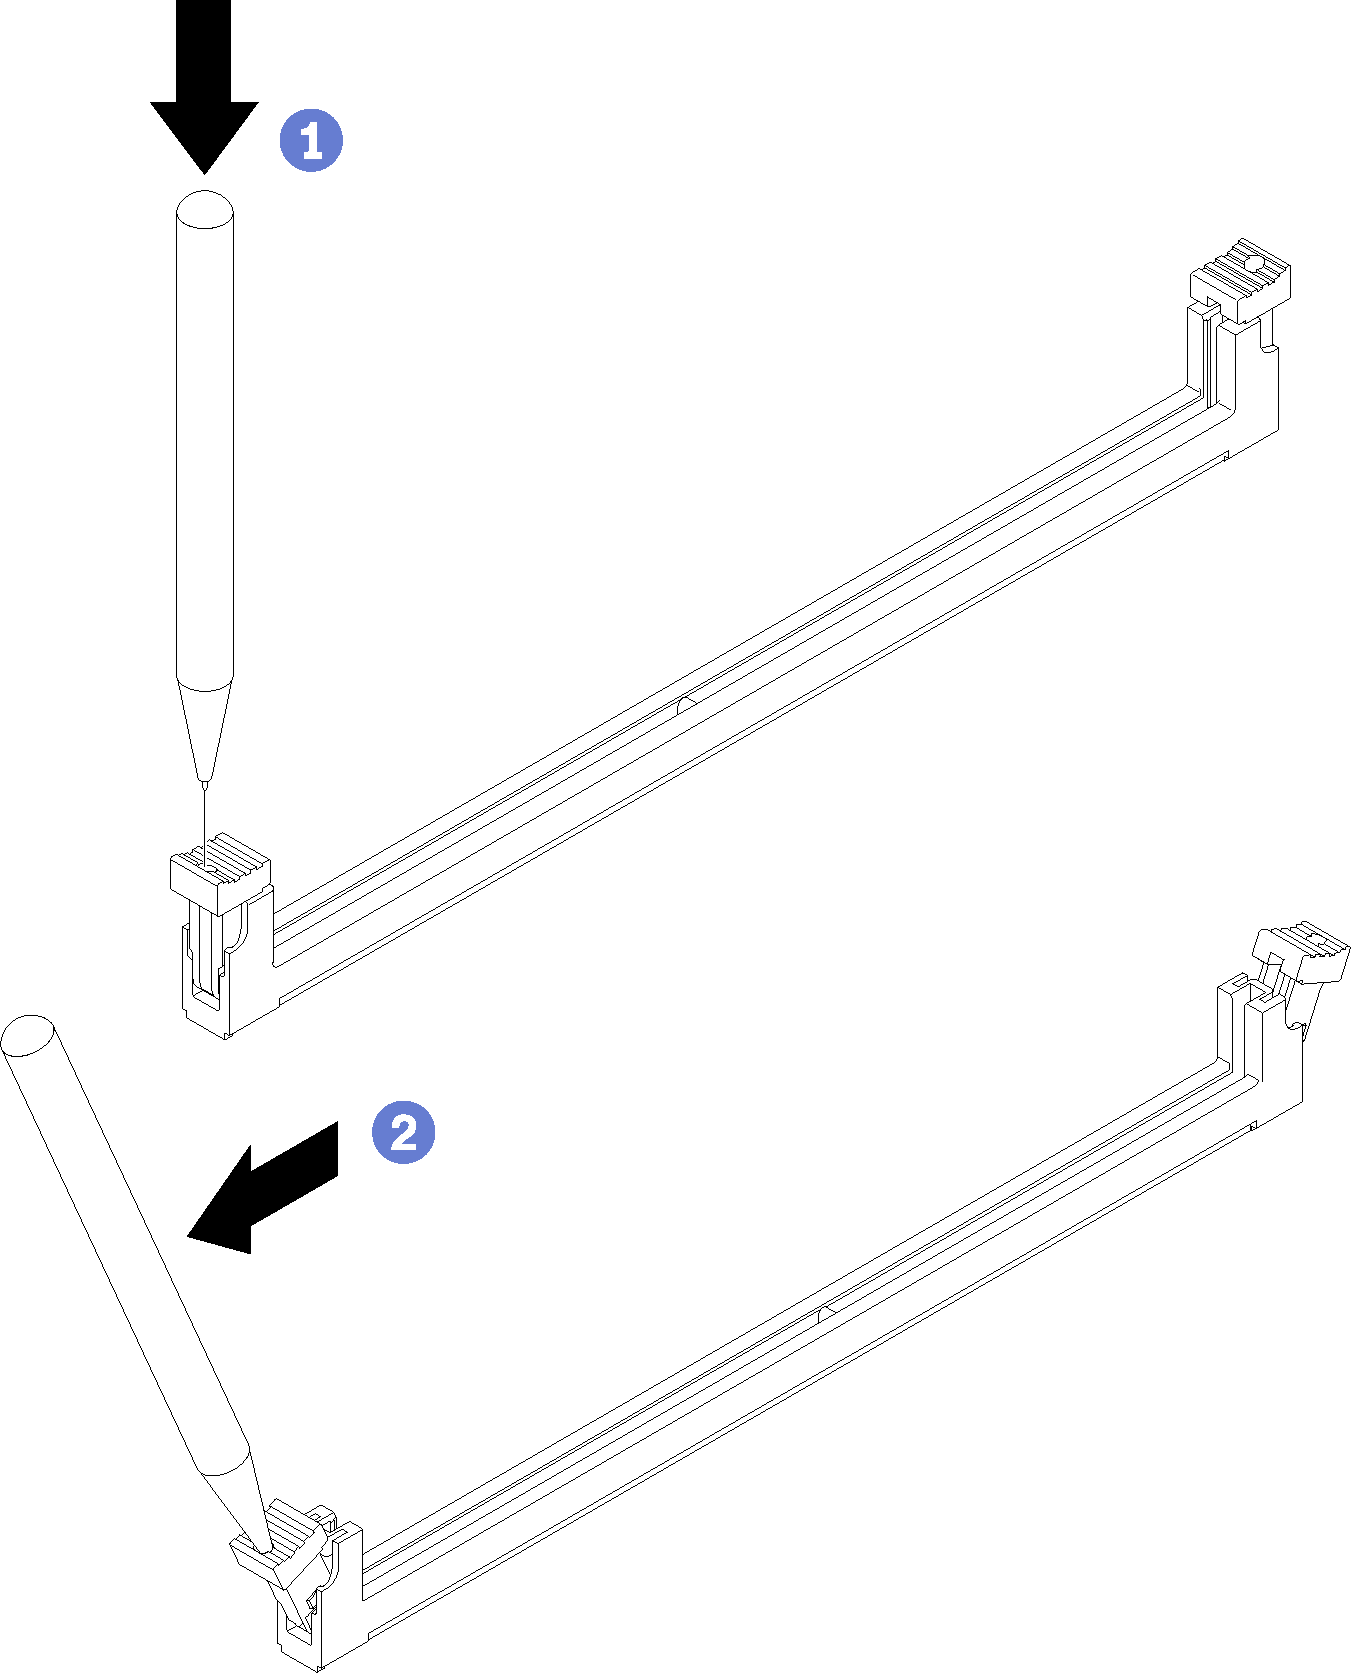 Graphic illustrating opening the DIMM retaining clips